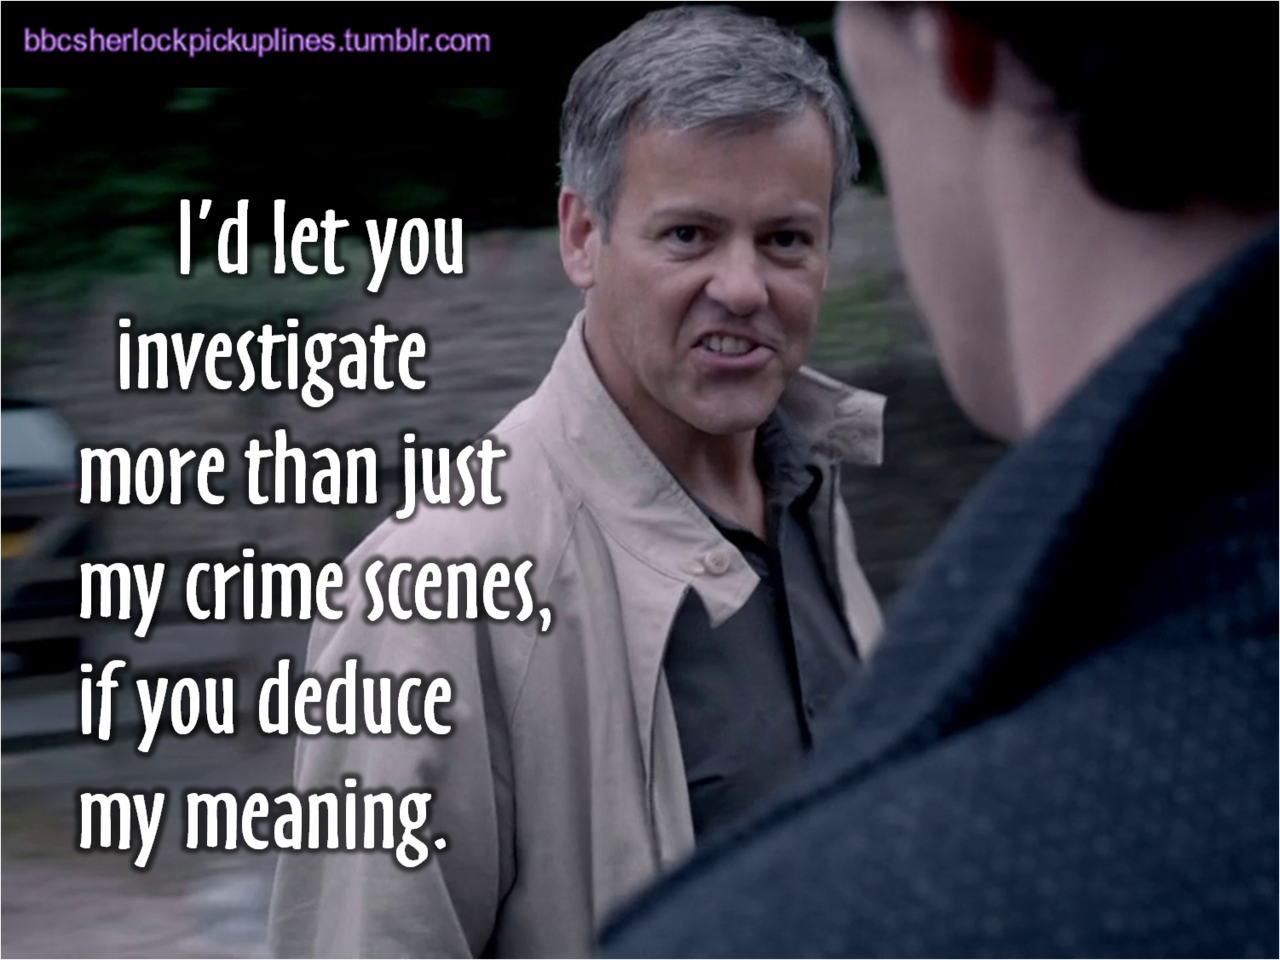 &ldquo;I&rsquo;d let you investigate more than just my crime scenes, if you